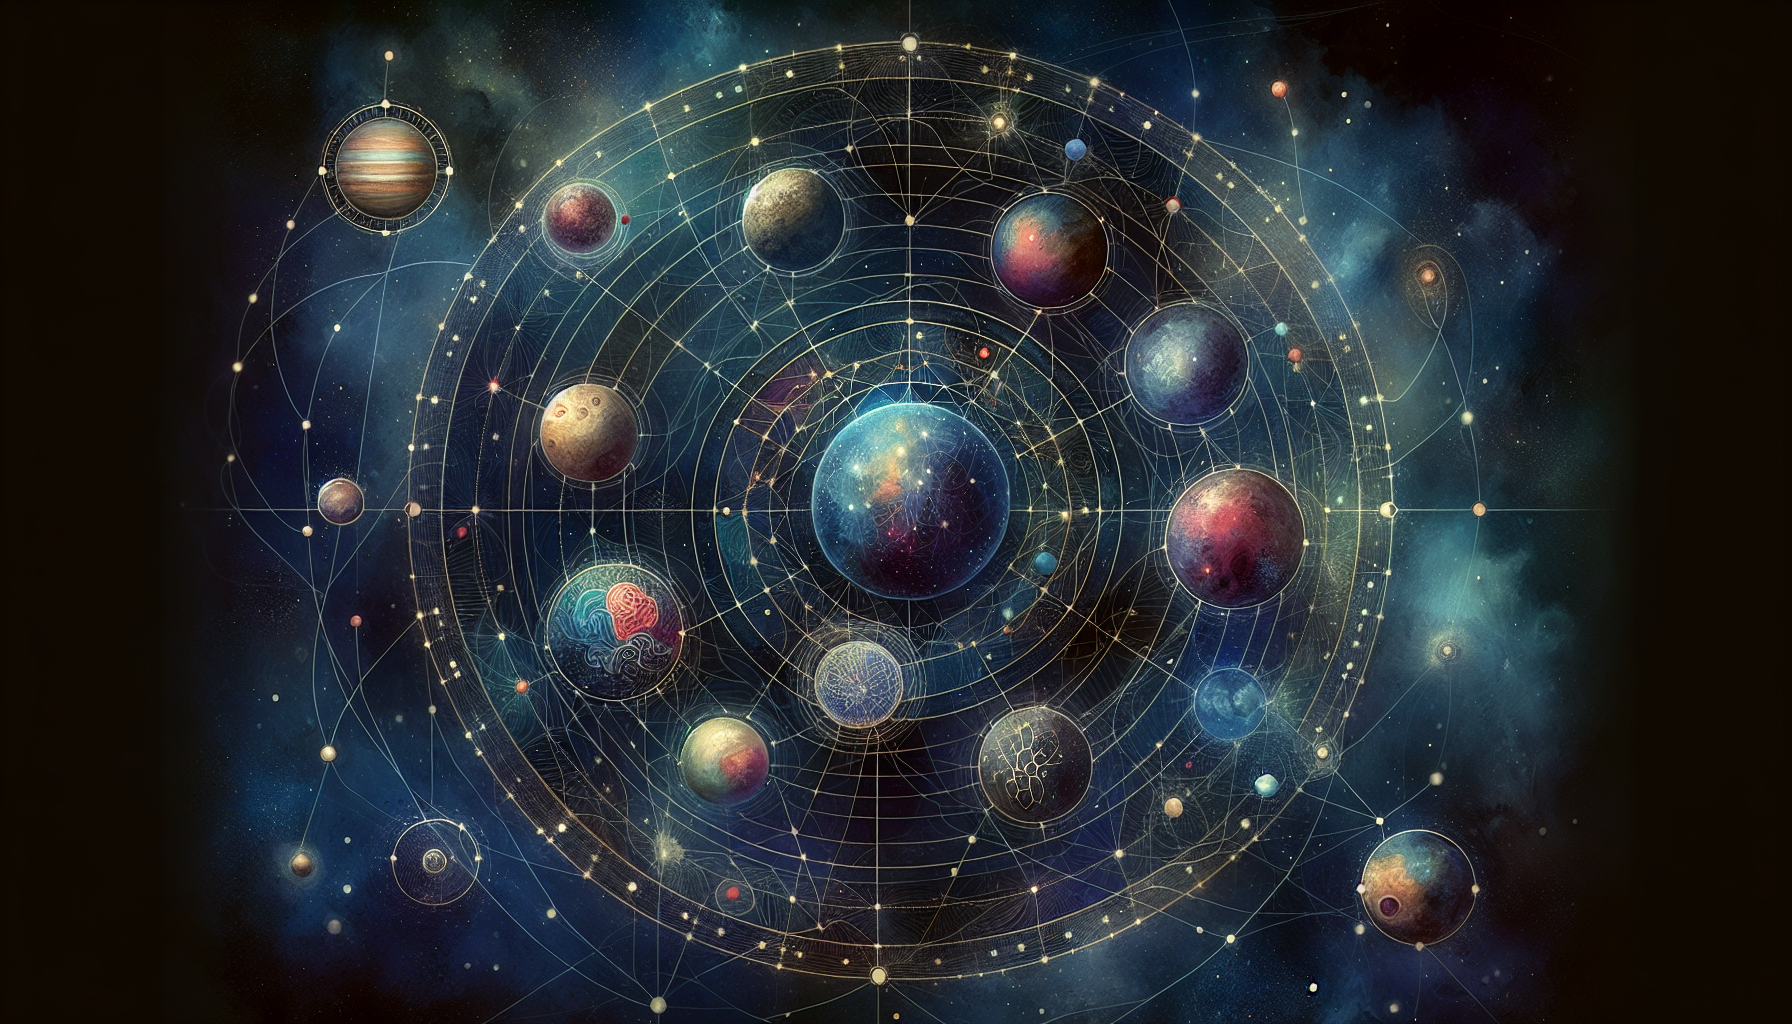 Artistic representation of planetary positions in a birth chart